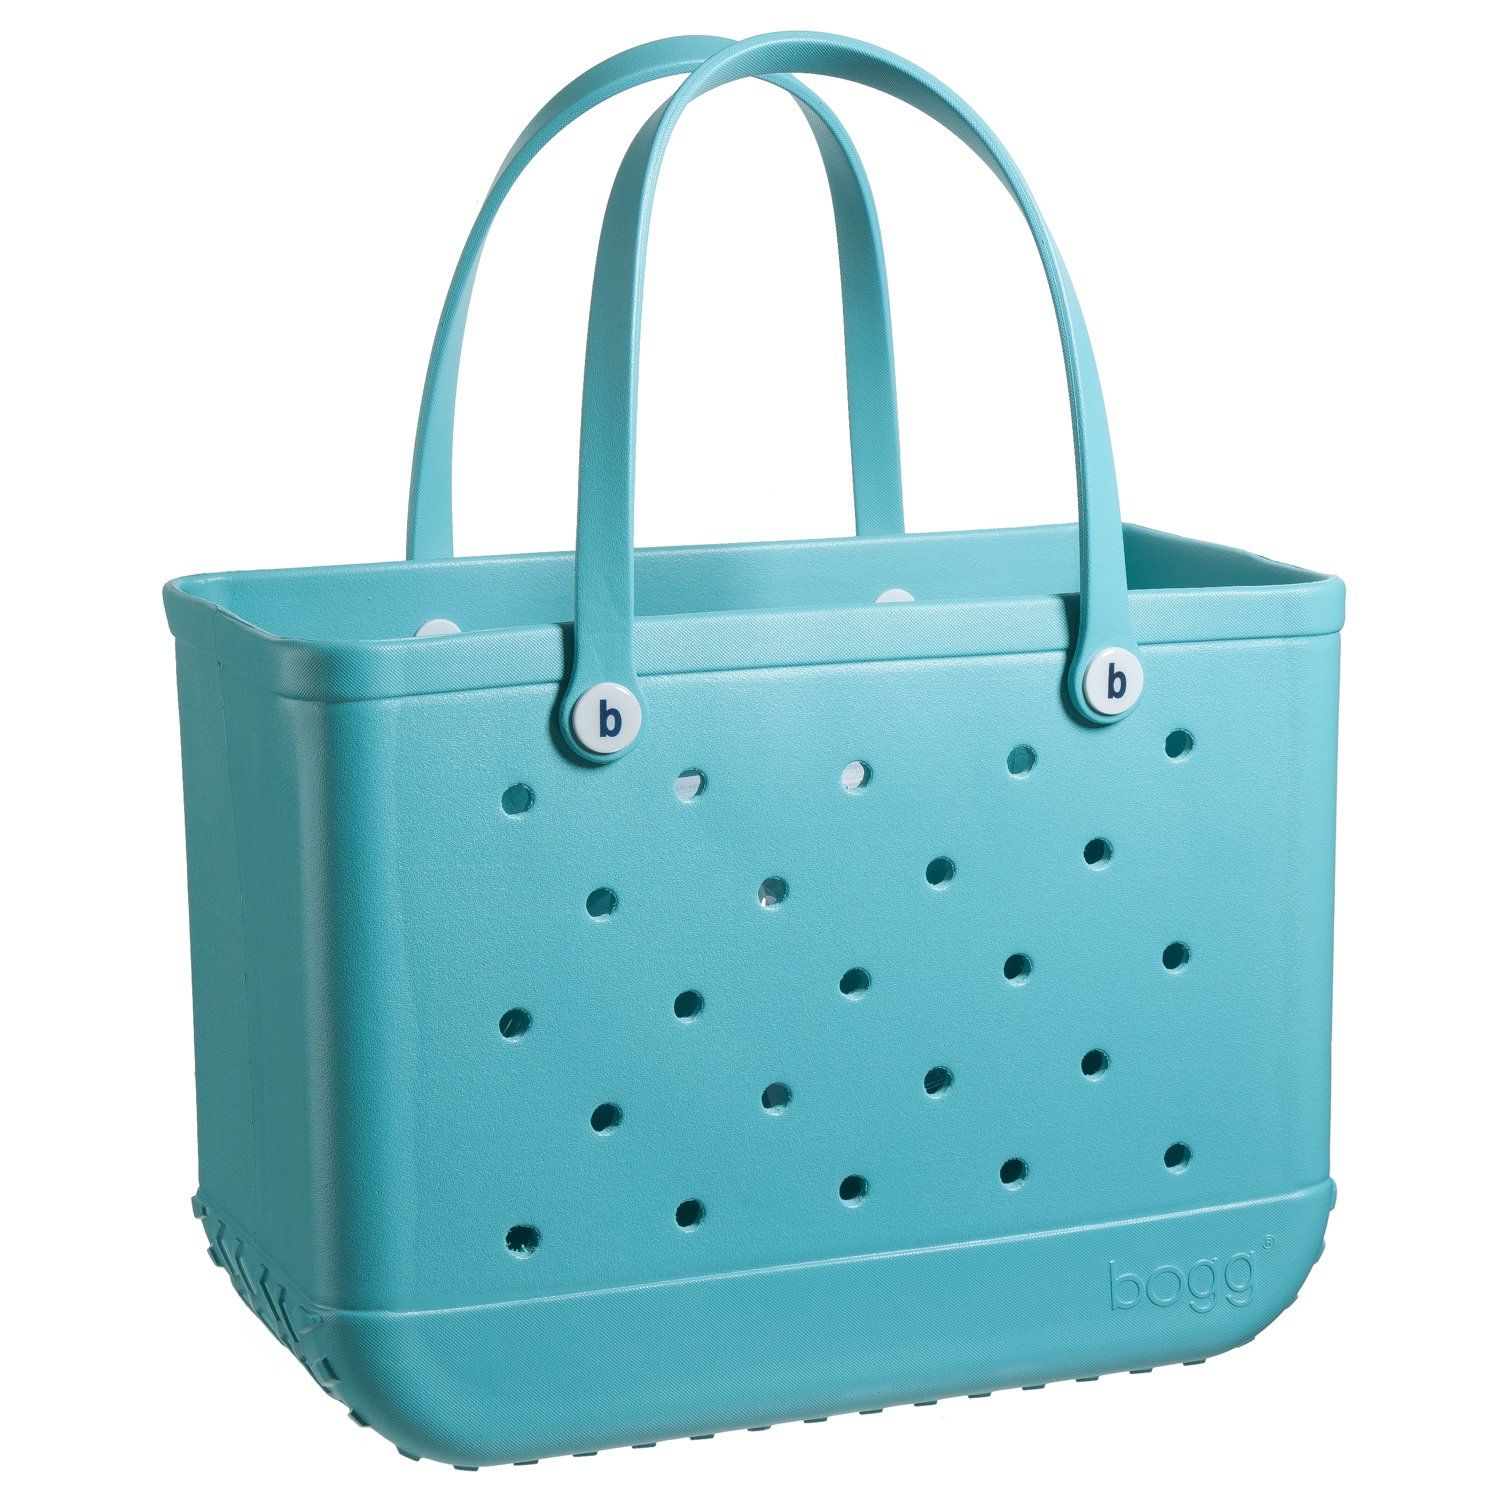 Discover more than 89 oversized beach tote bags latest - in.cdgdbentre